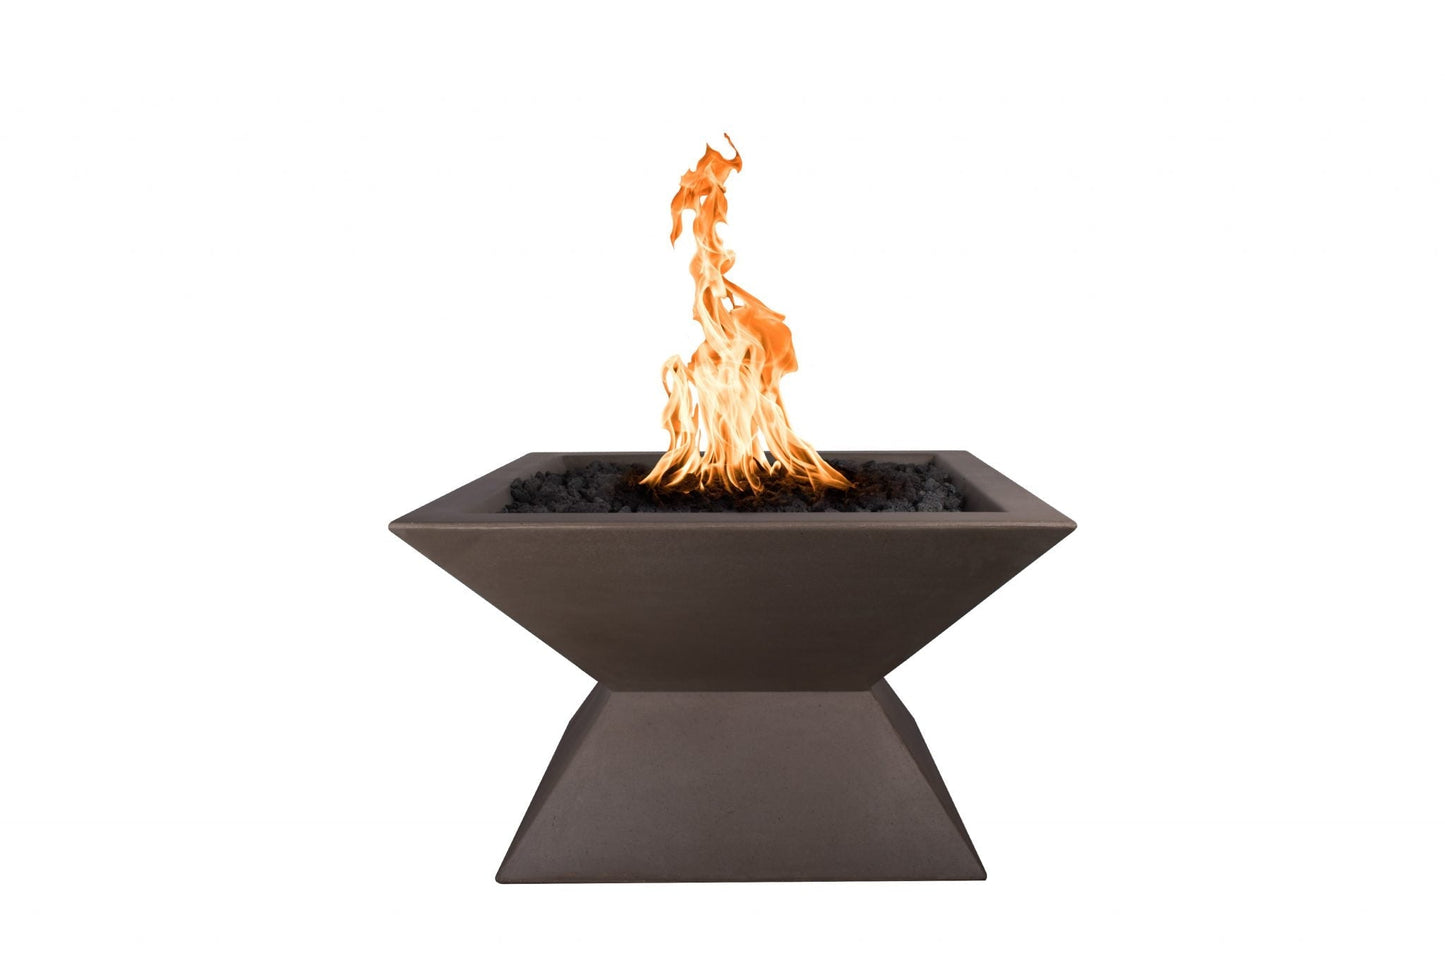 The Outdoor Plus Square Uxmal 30" Metallic Slate GFRC Concrete Liquid Propane Fire Pit with 12V Electronic Ignition